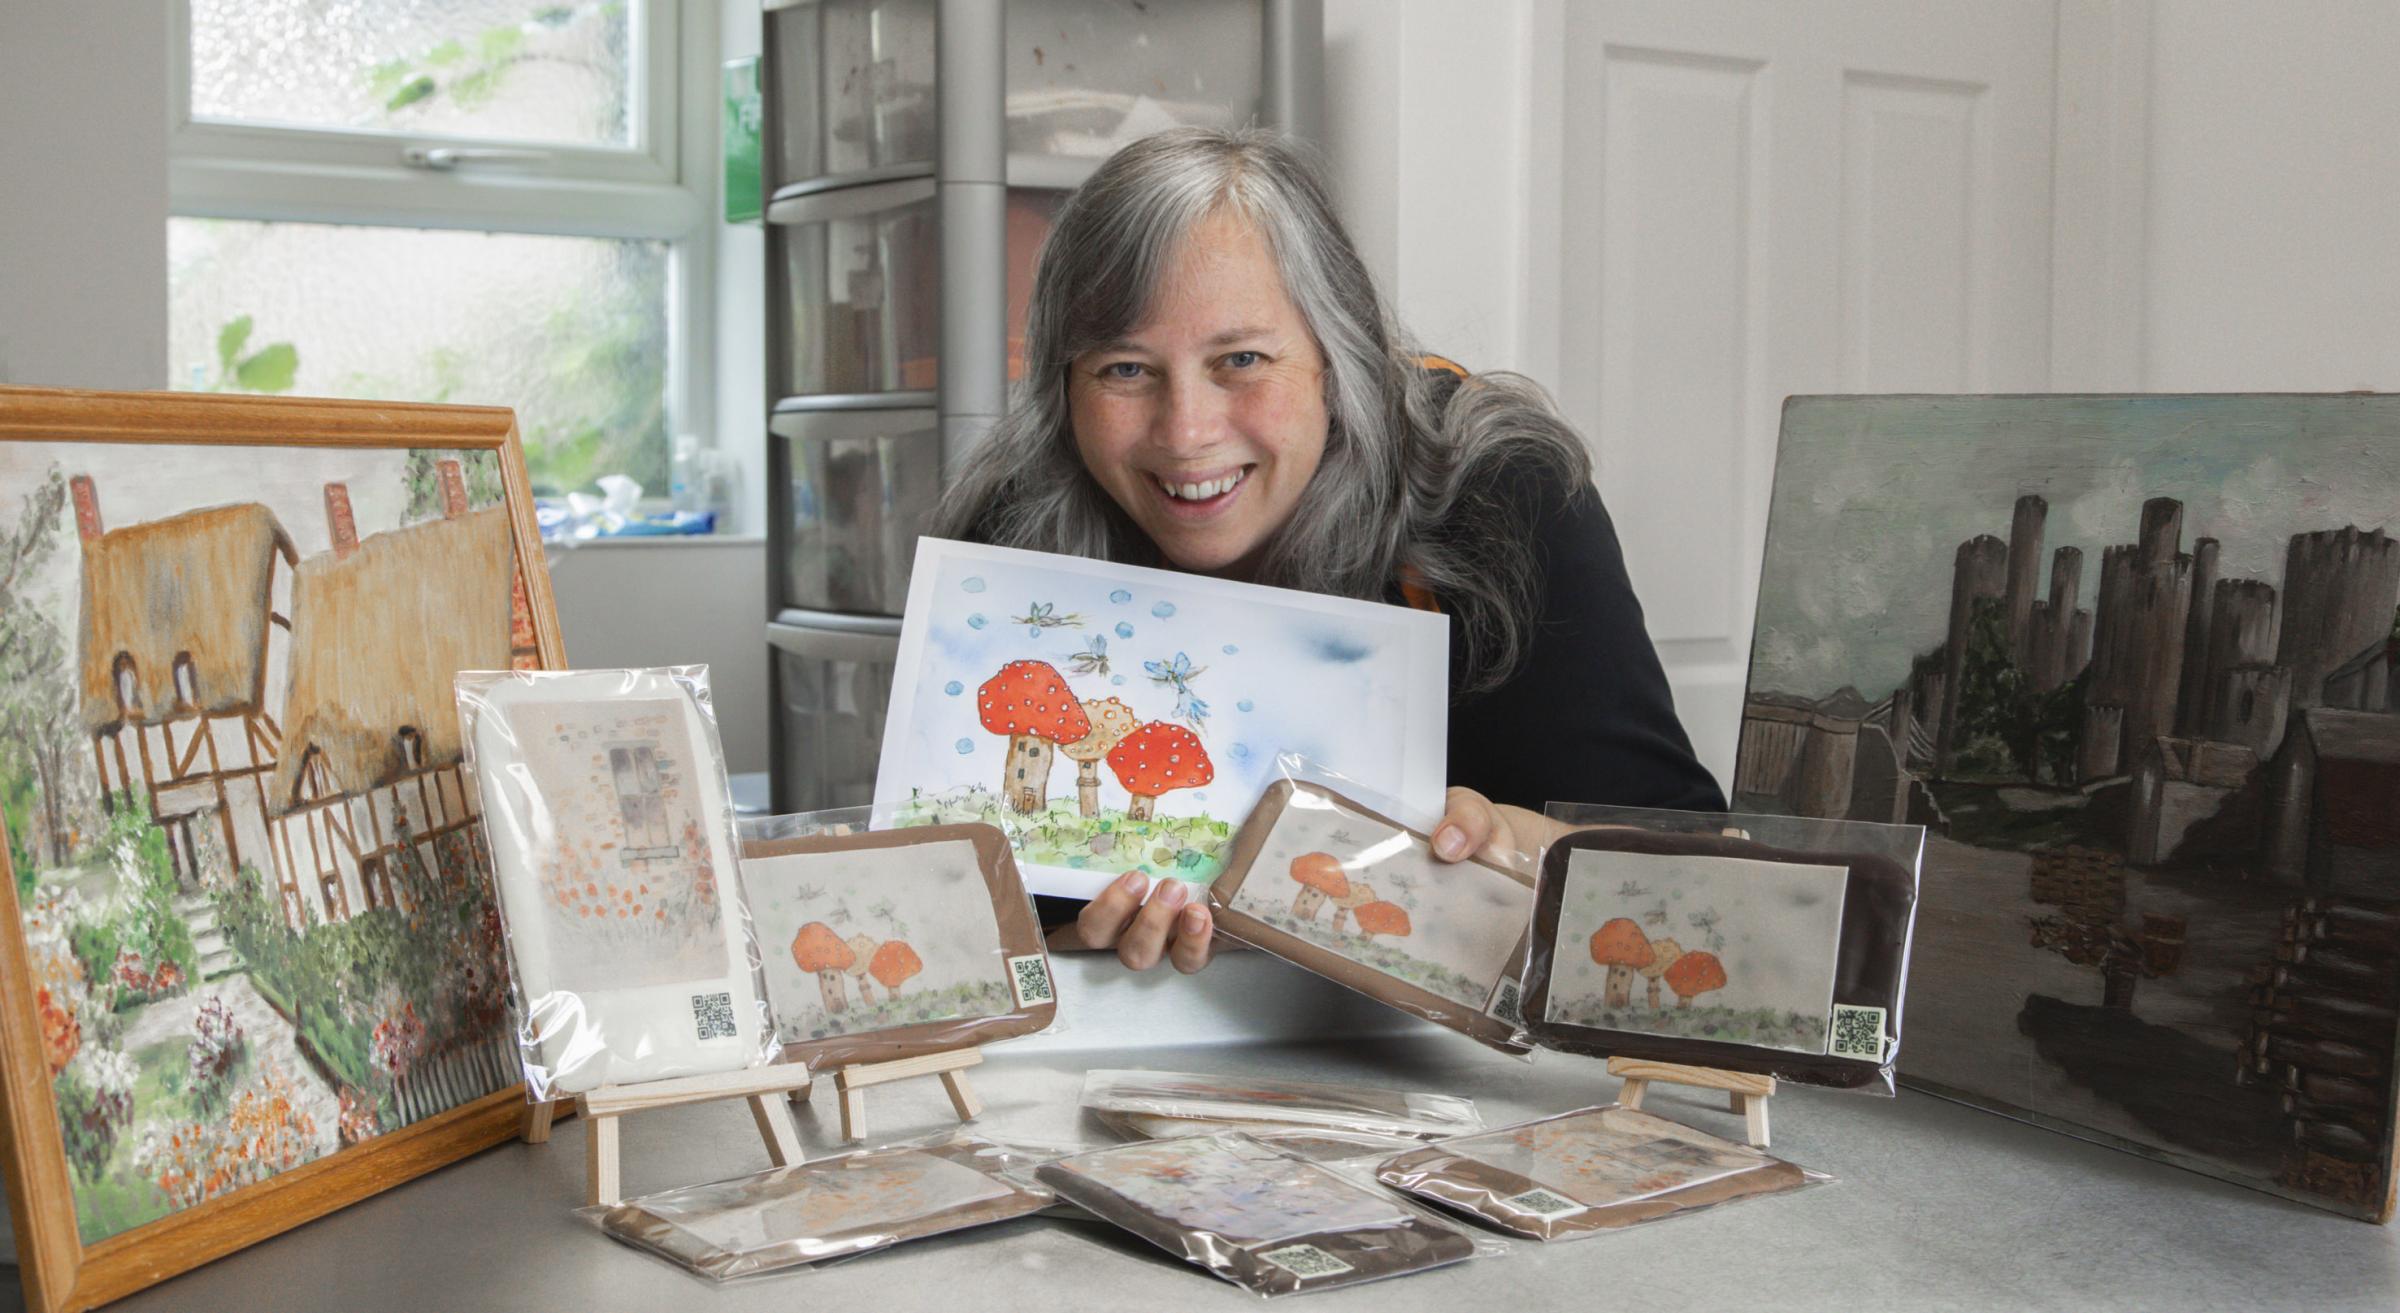 Chocolatier Jo Edwards with her late grandmothers artwork created onto chocolate bars.